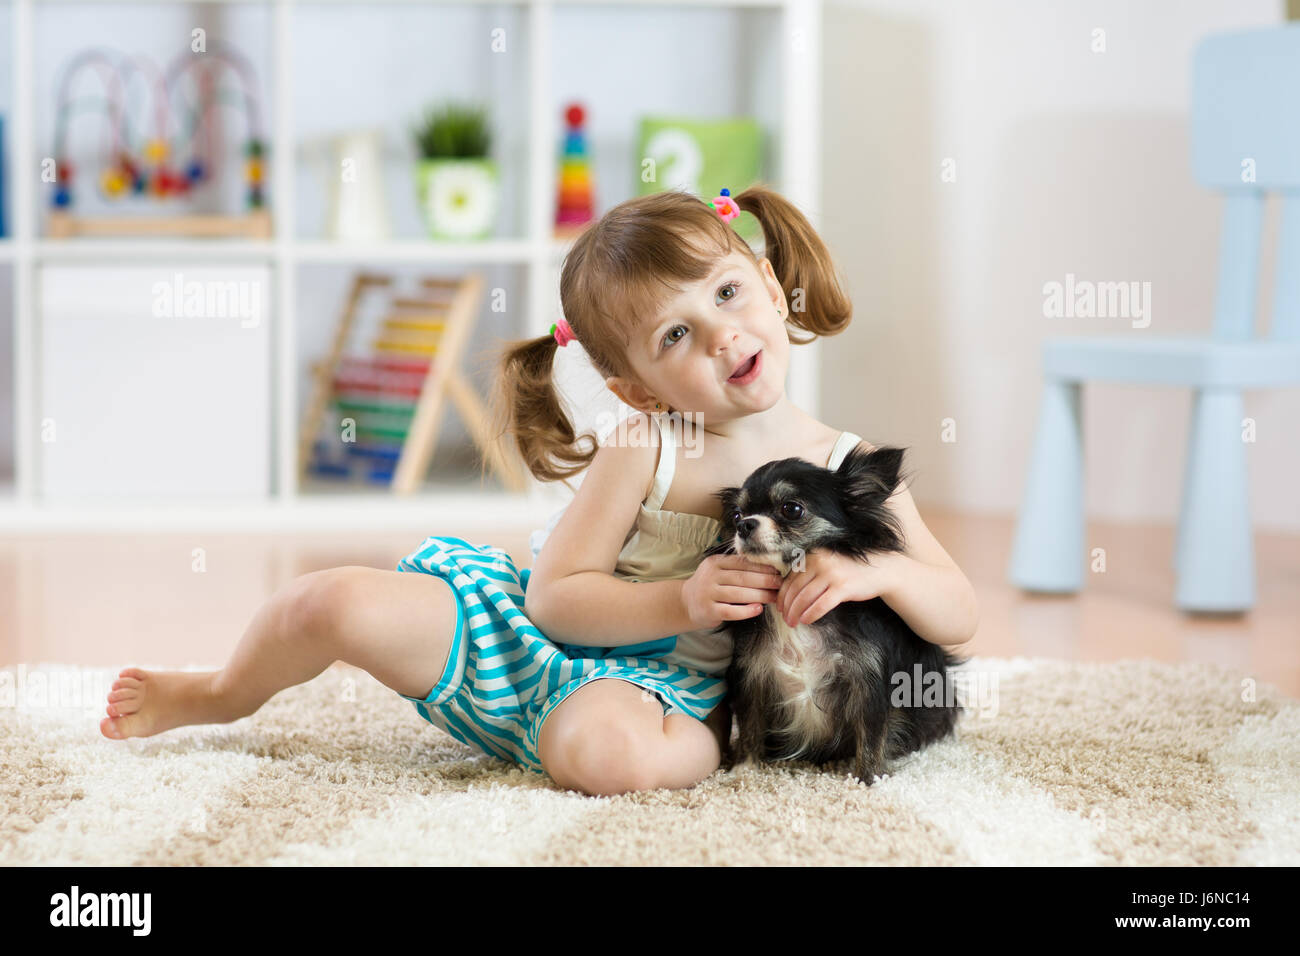 Lovely little girl playing with her pet dog Stock Photo